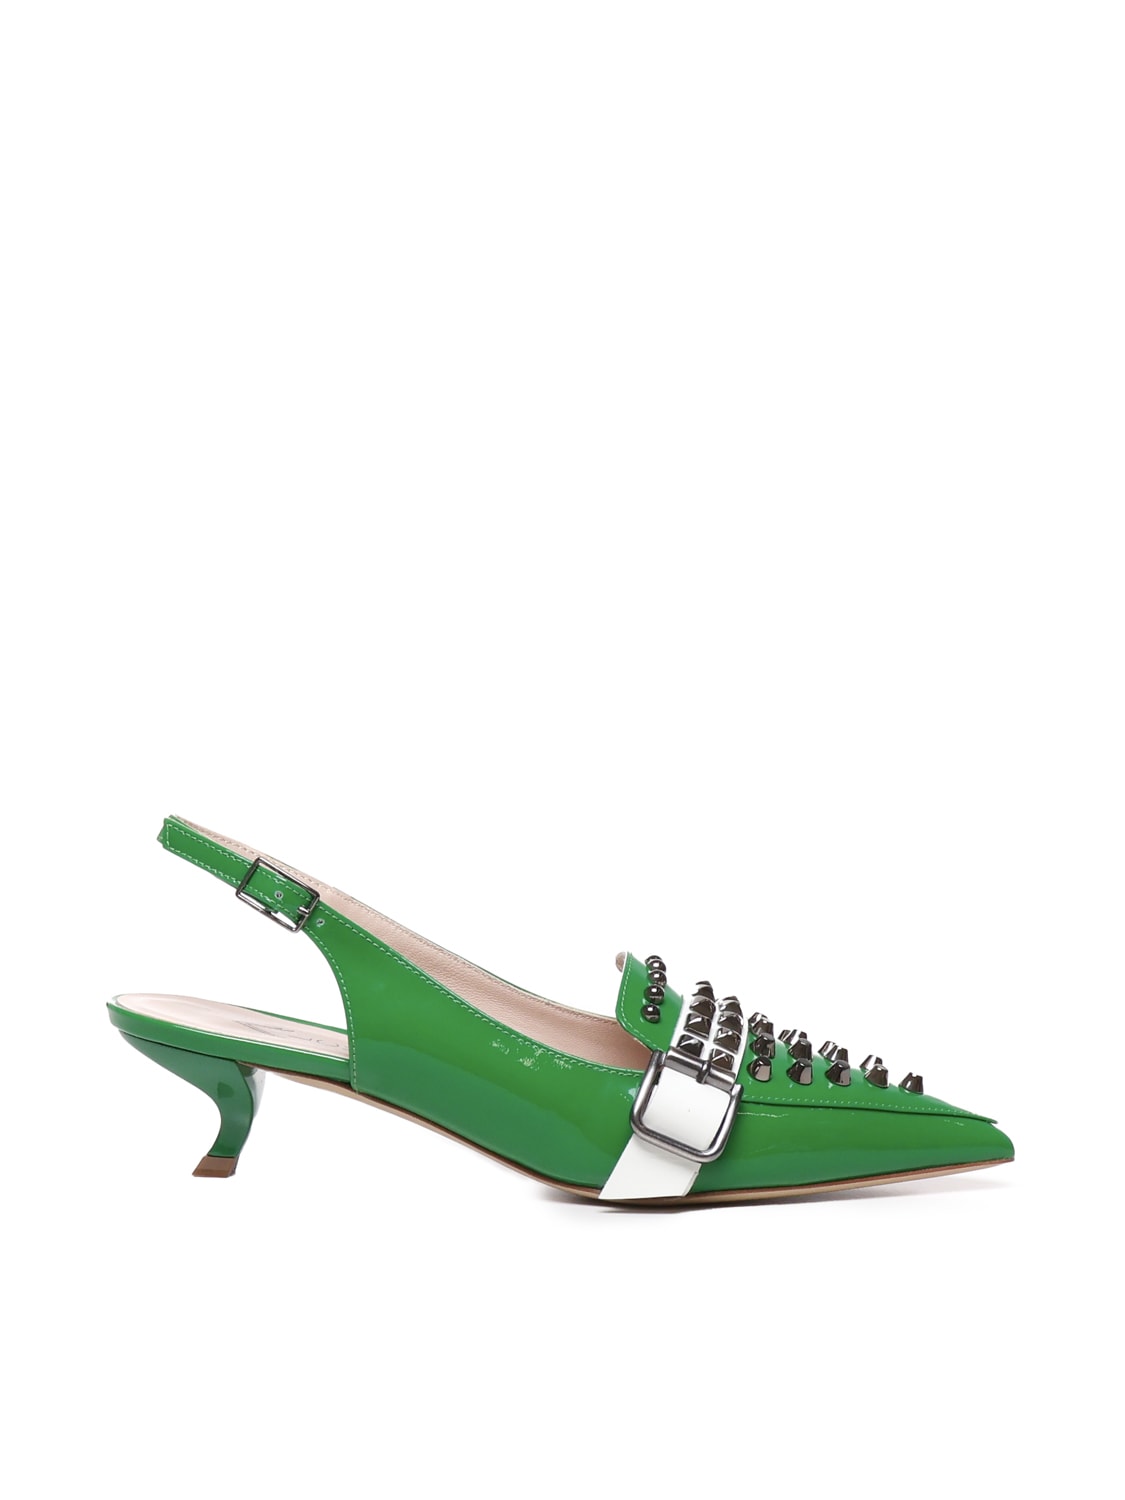 Patent Slingback With Studs And Buckle